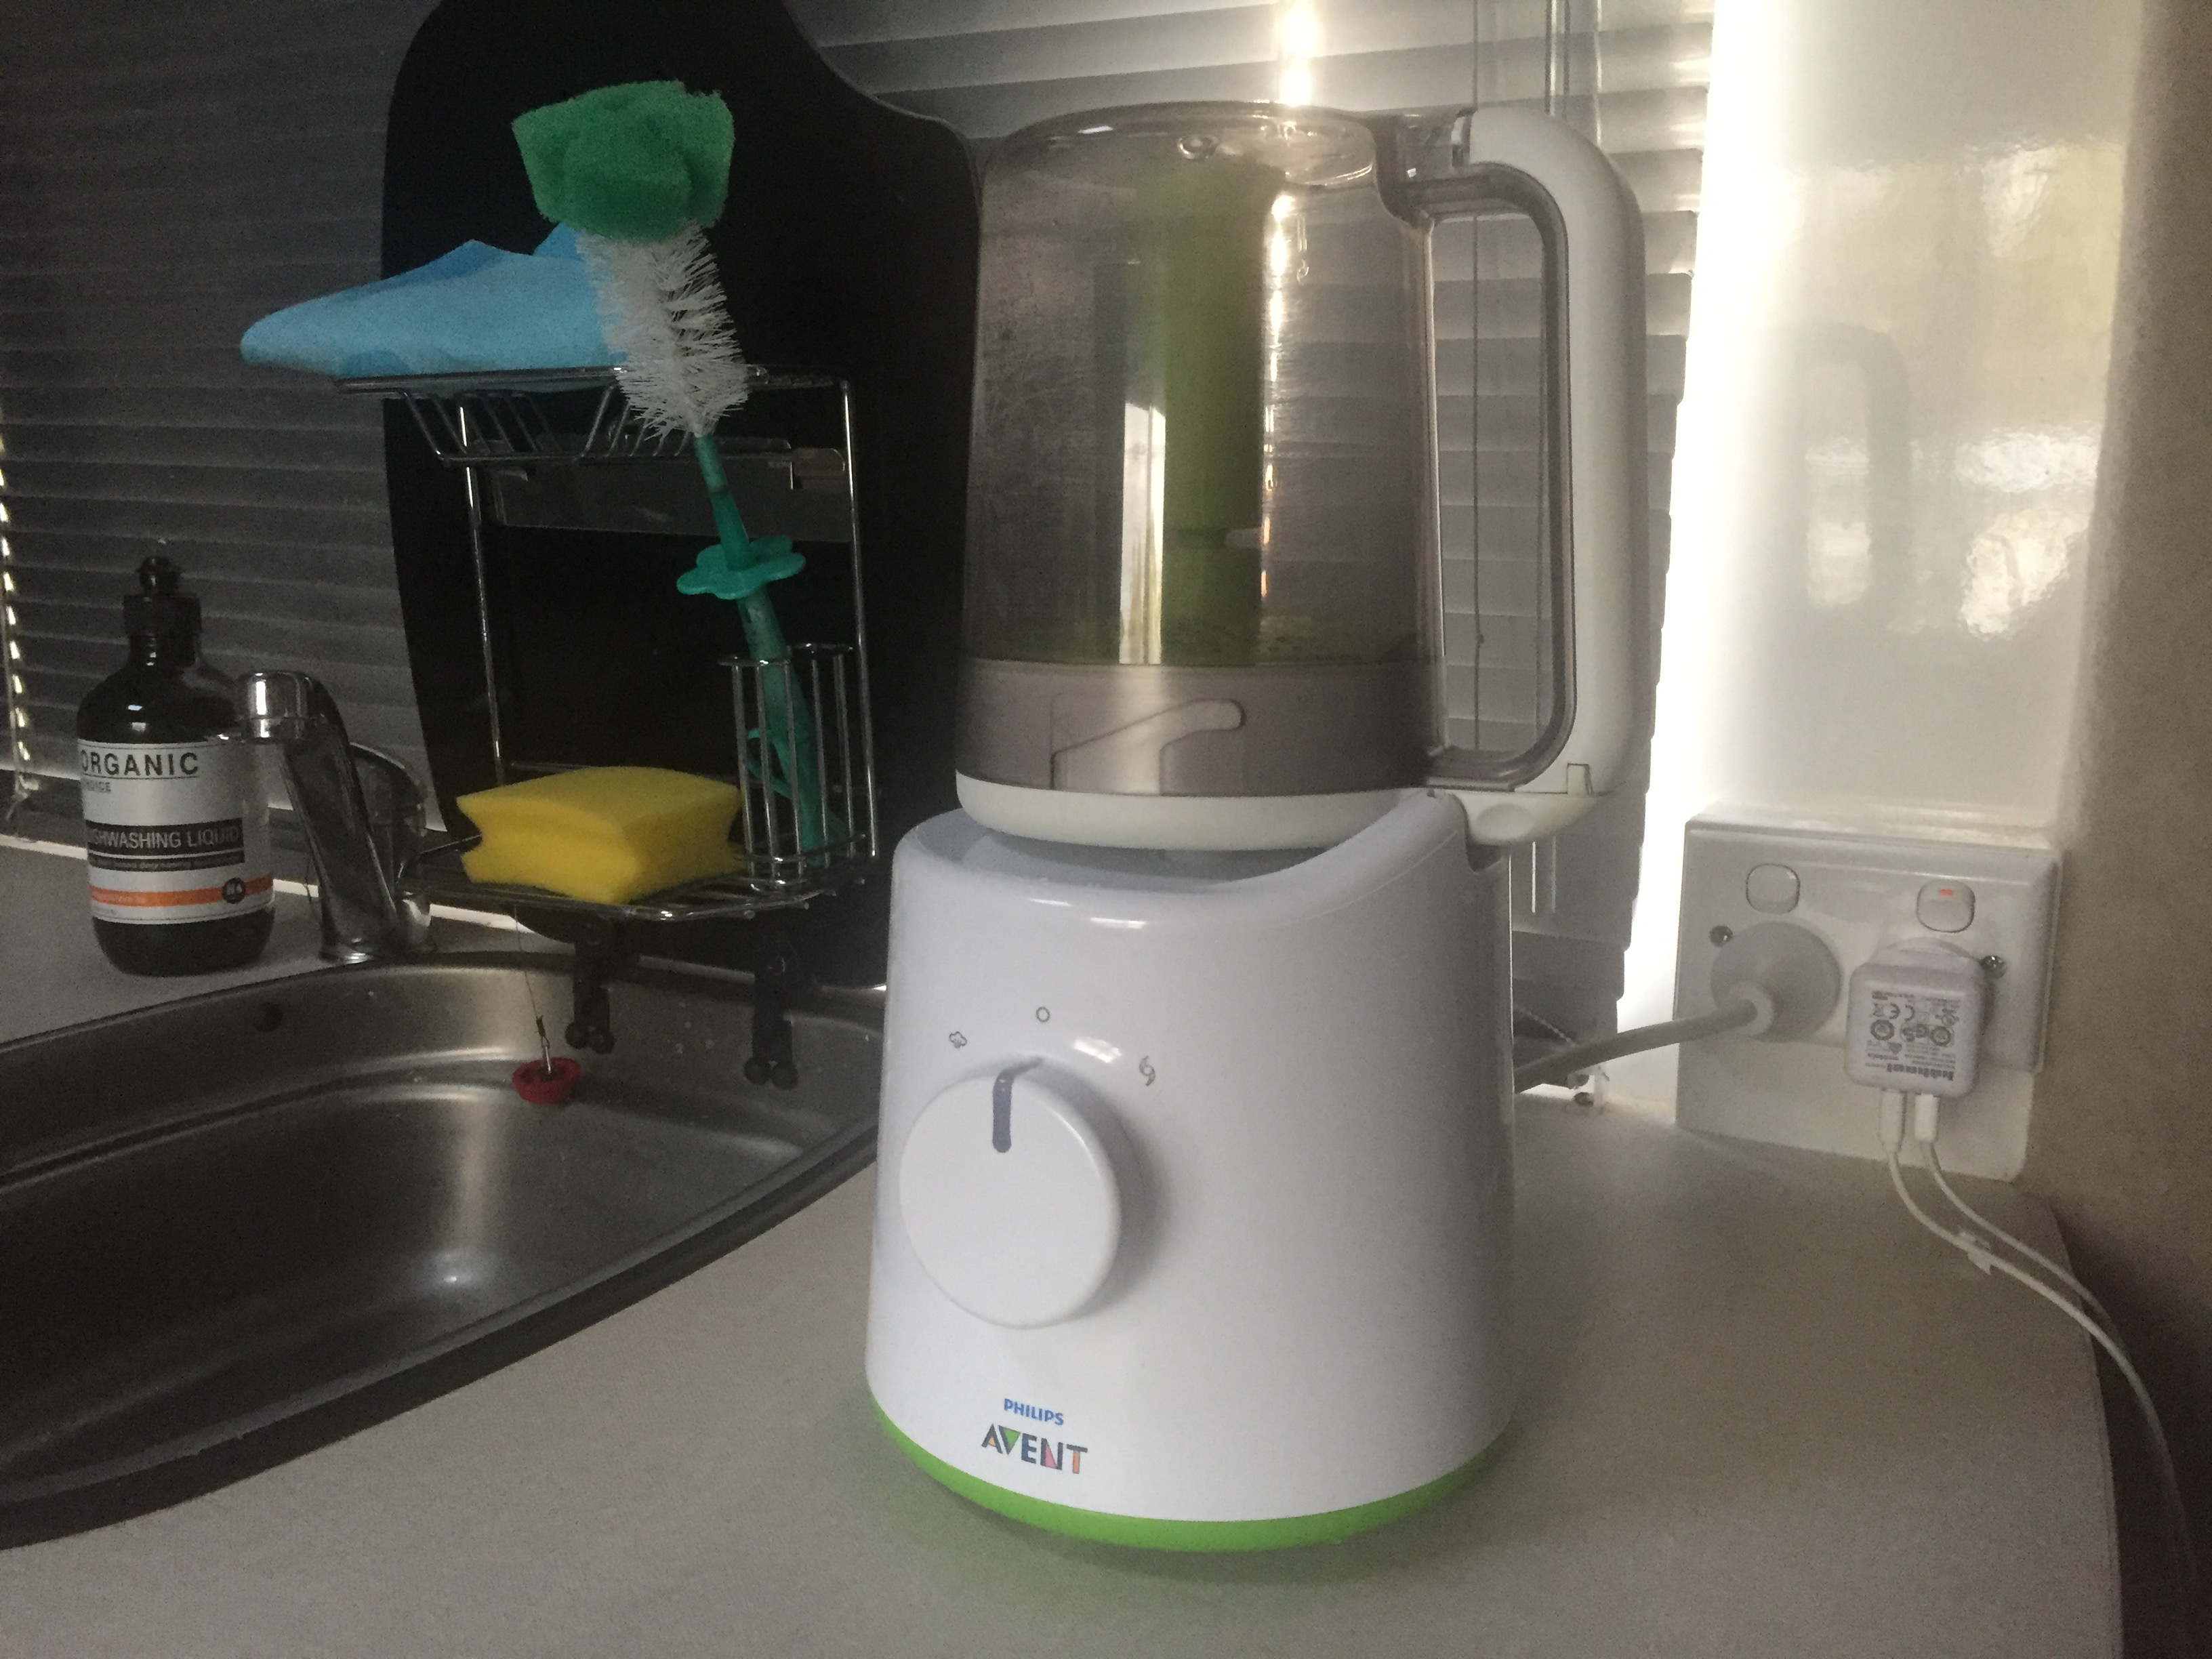 Philips Avent baby food maker